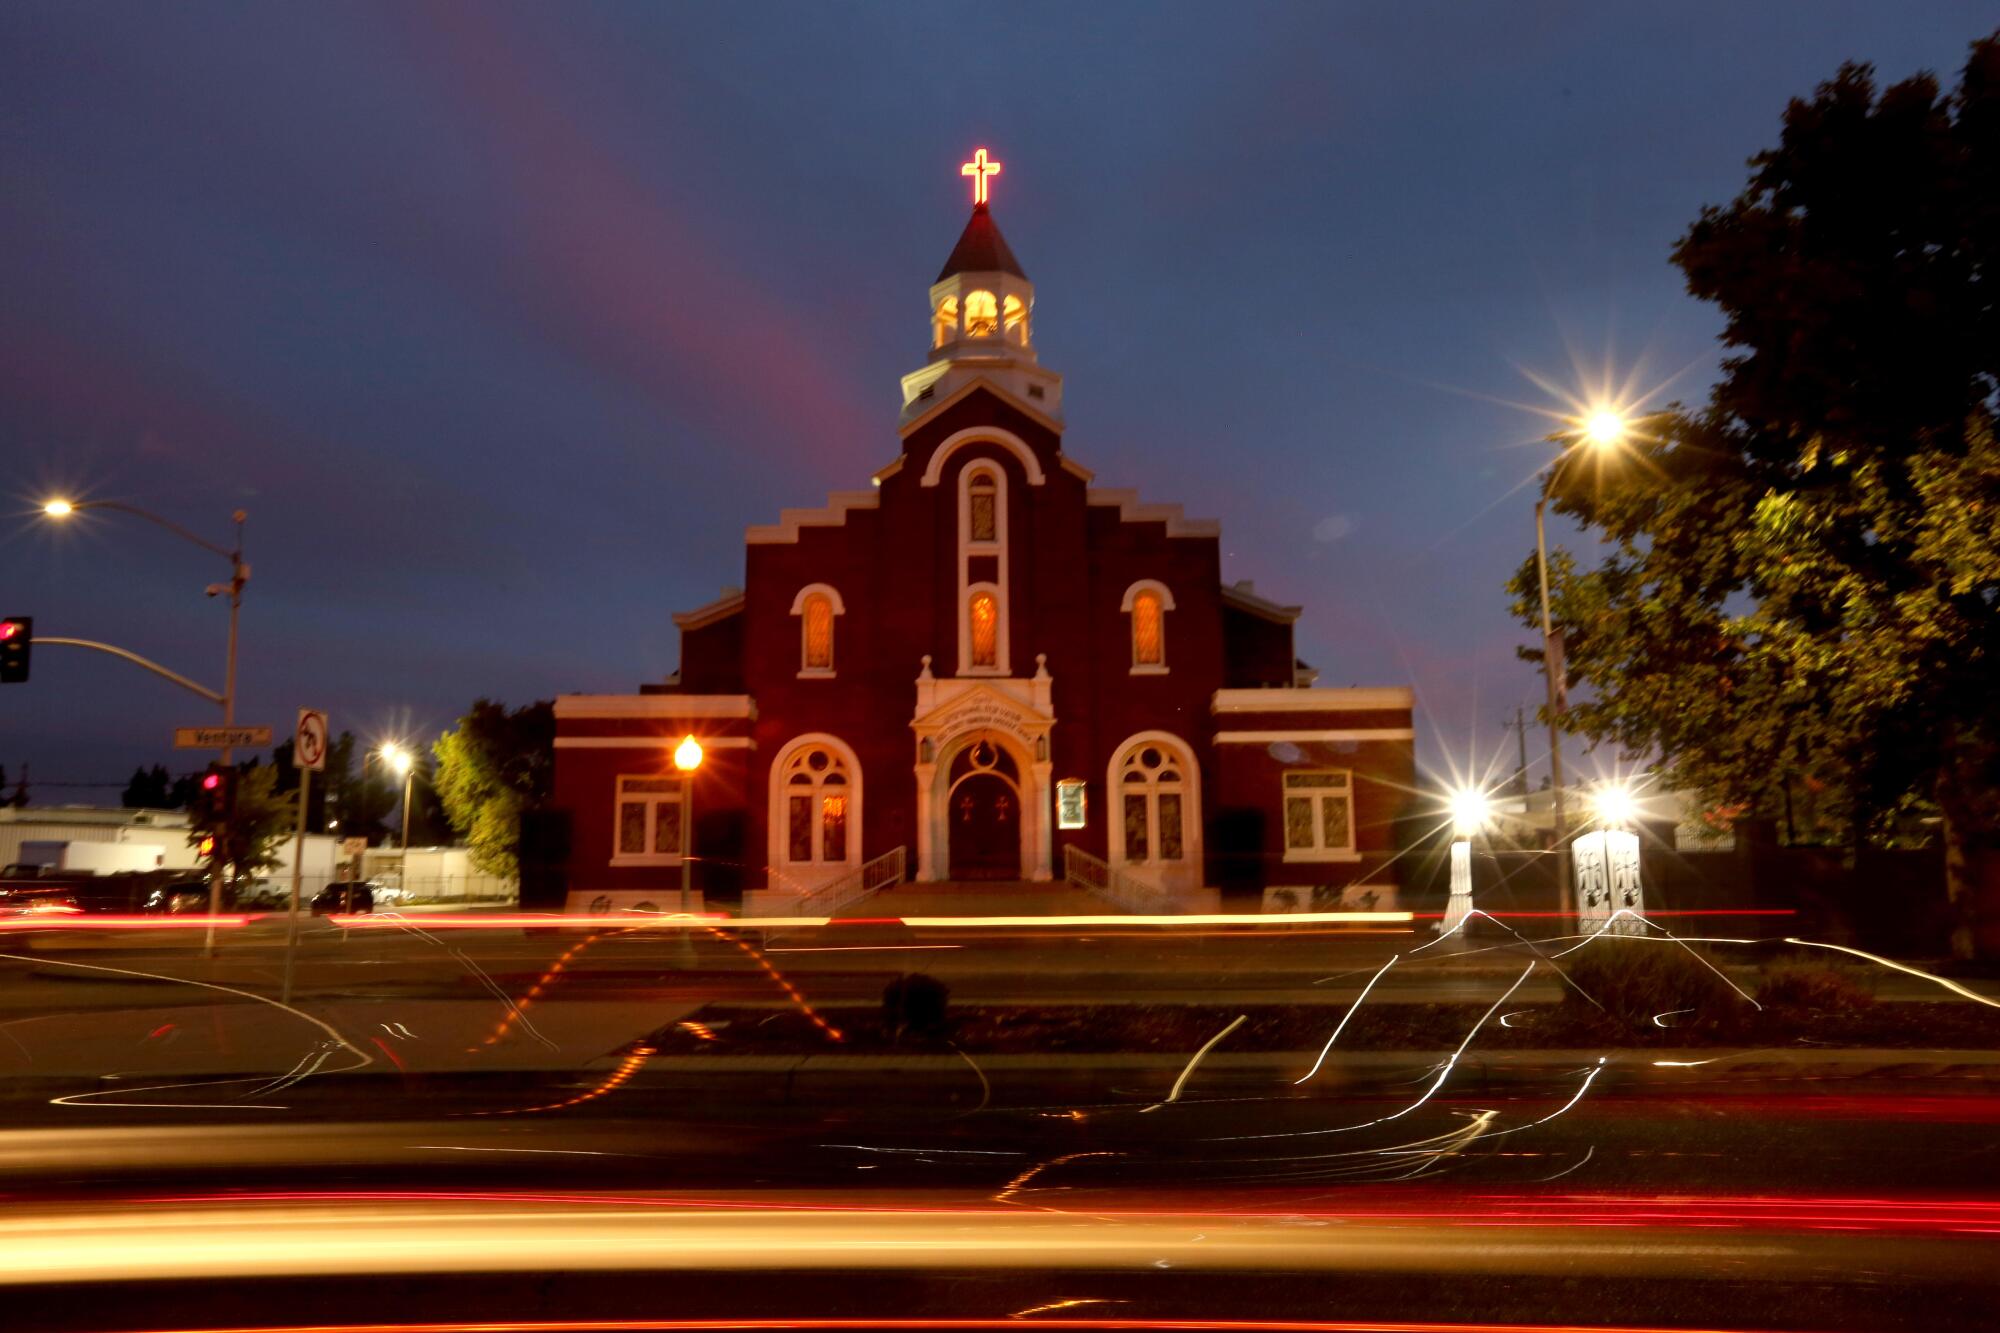 A church building at night with streaks from car lights in the foreground